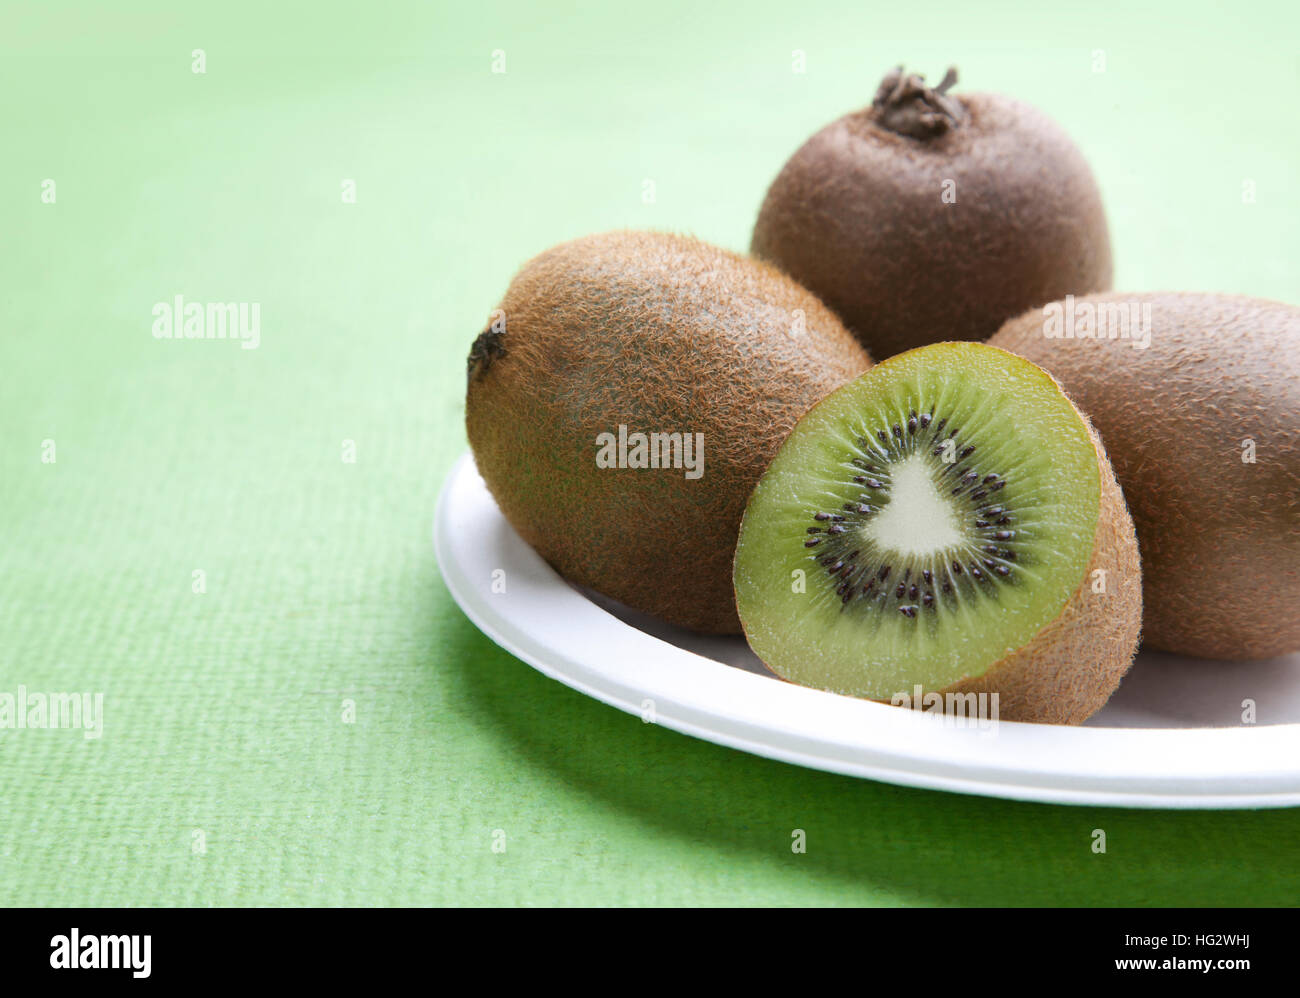 Close-up view of Kiwi fruit on plate Stock Photo